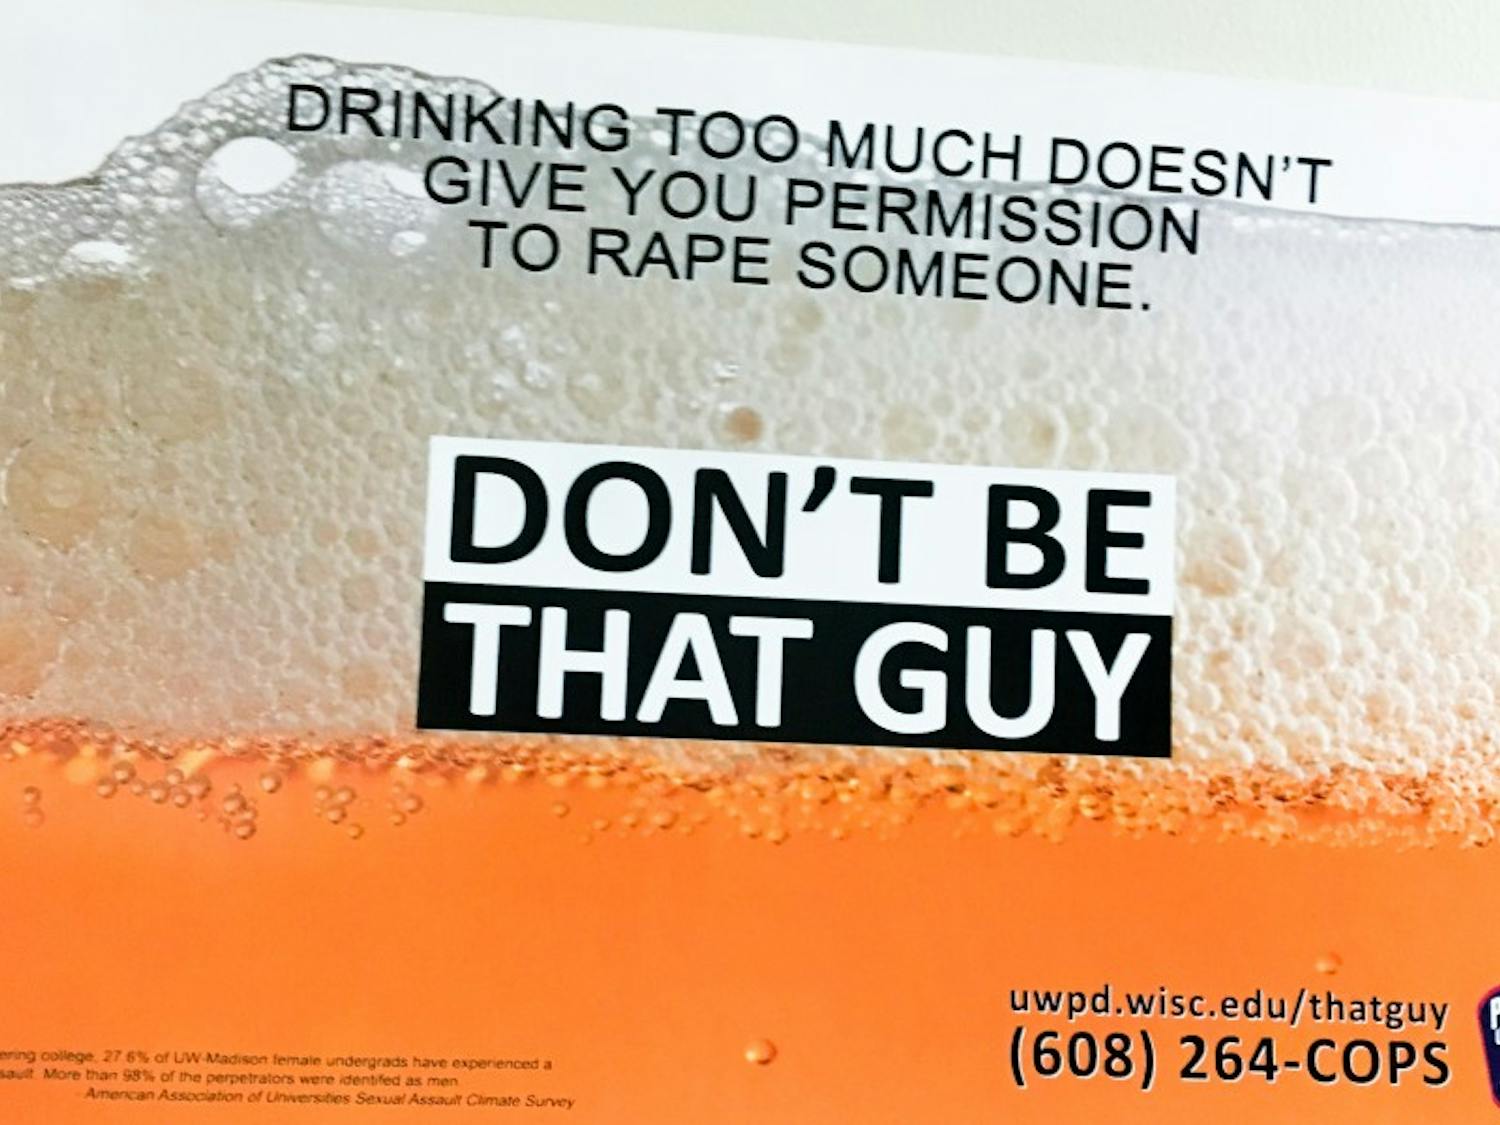 The UW-Madison Police Department launched the “Don’t Be That Guy” campaign in 2015, which targeted male perpetrators with heteronormative imagery.